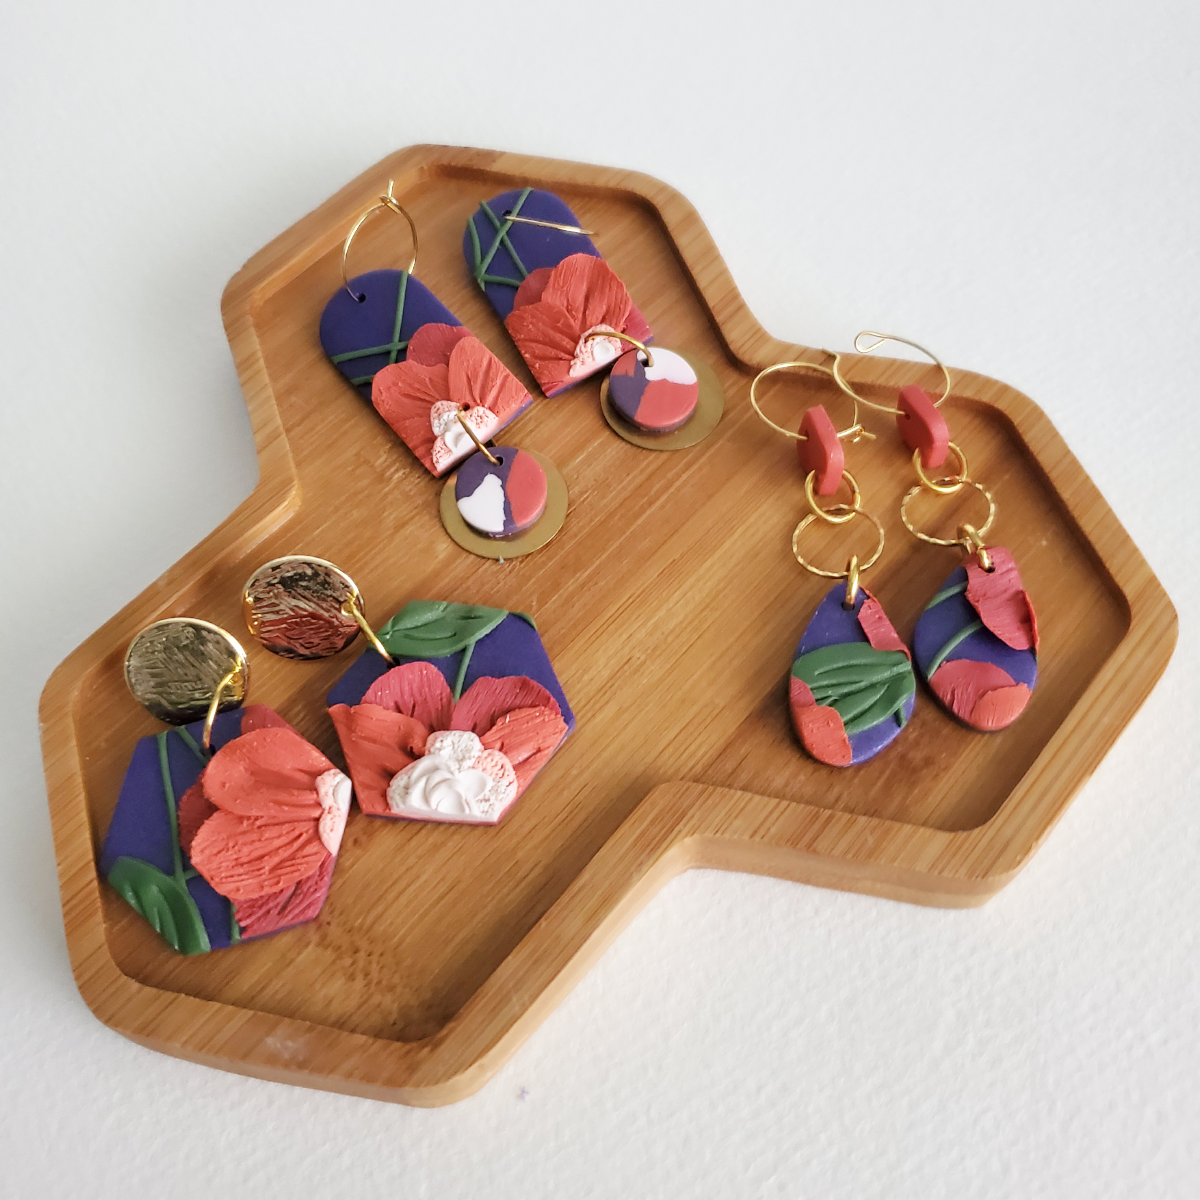 camillerene_handmade_polymer_clay_purple_orange_flower_poppies_gold_arches_hexagons_dangles_tray-1